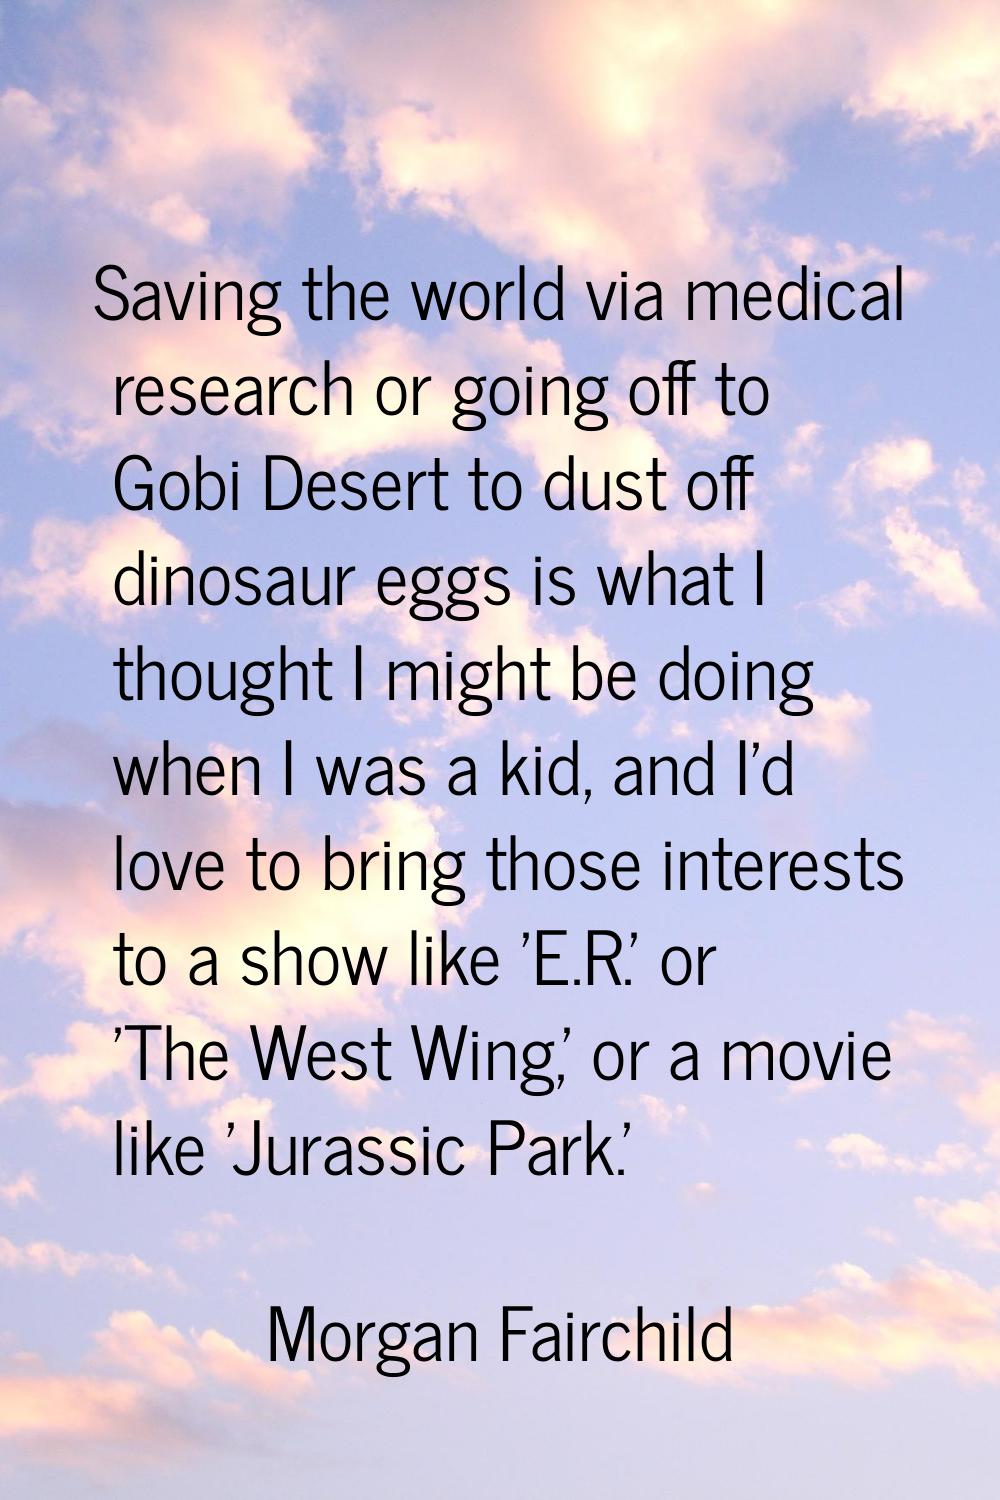 Saving the world via medical research or going off to Gobi Desert to dust off dinosaur eggs is what